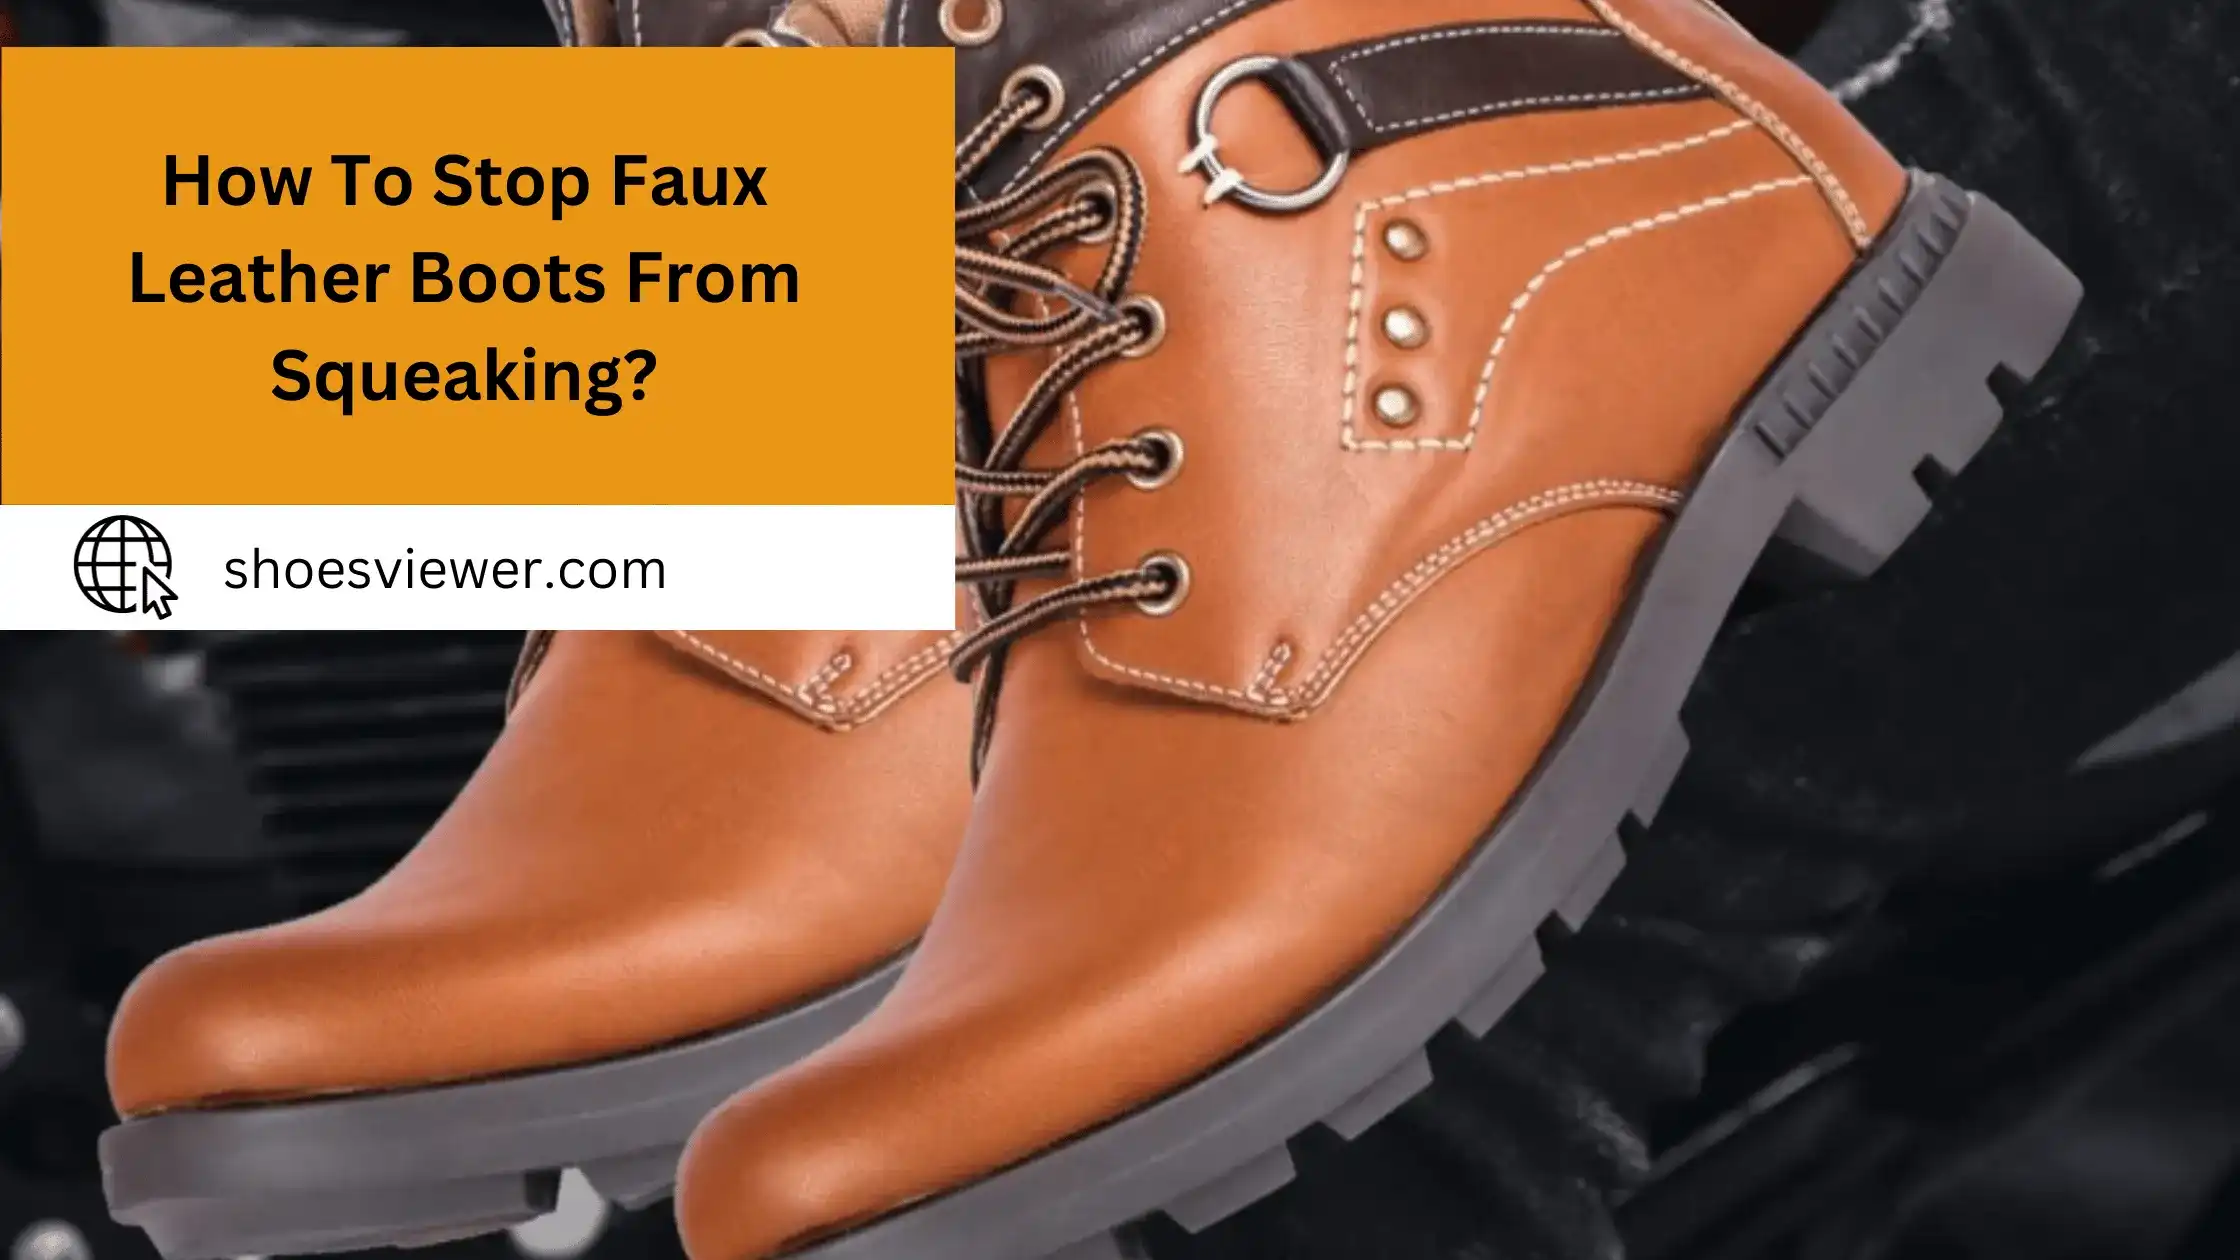 How To Stop Faux Leather Boots From Squeaking? (Easy Steps)